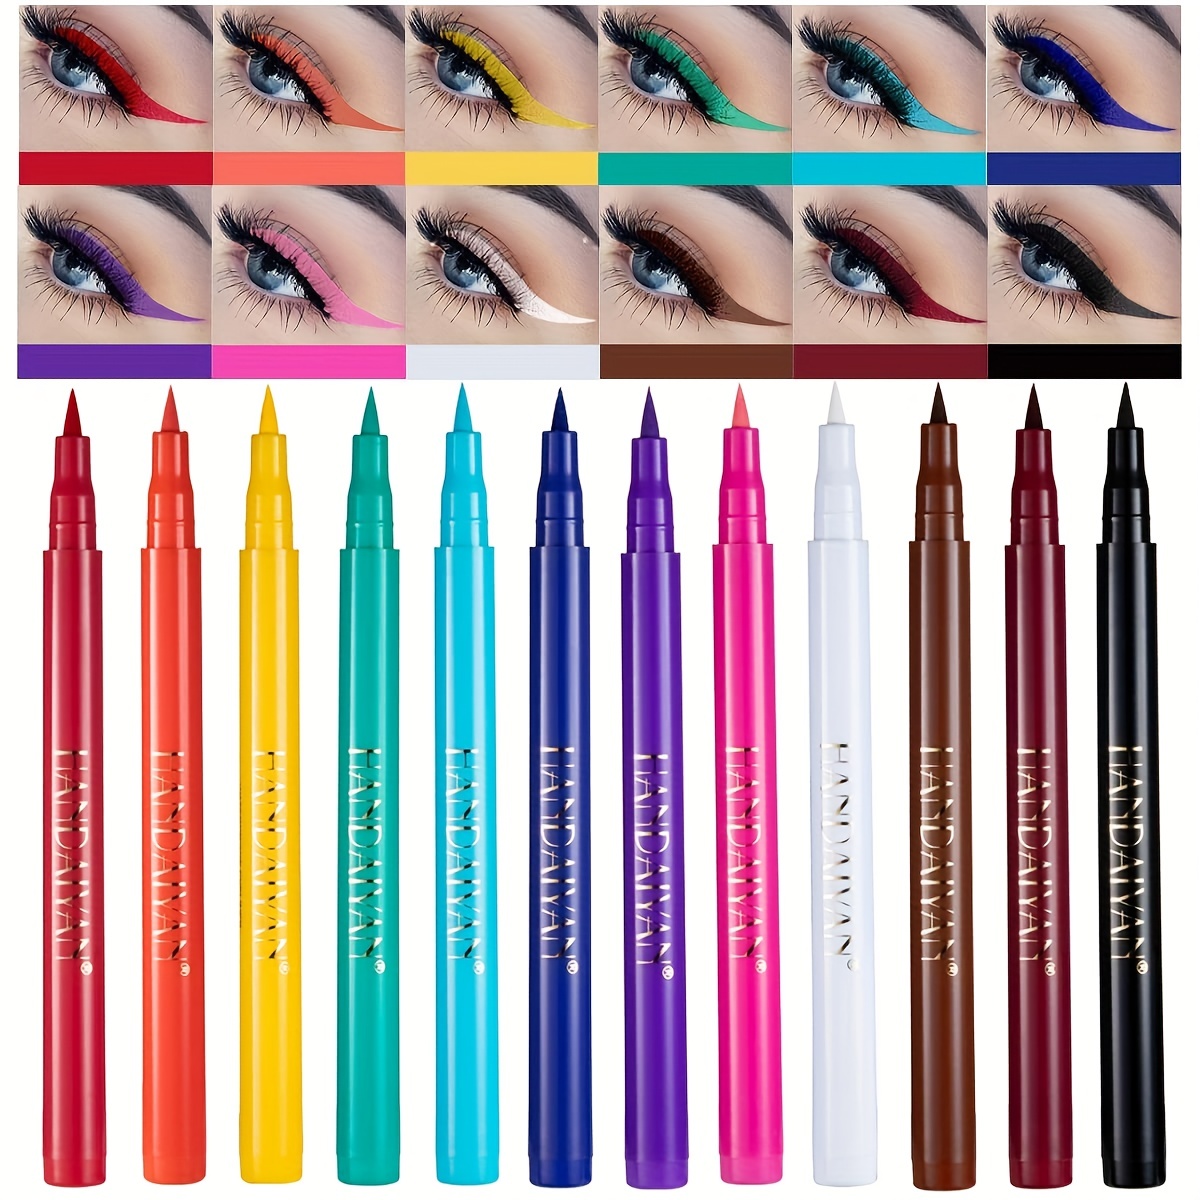 8 Colors UV Glow Neon Liquid Eyeliner Set,Colored Eyeliners Pen, Colorful  Waterproof Smudge-proof Pigmented Graphic Liners 